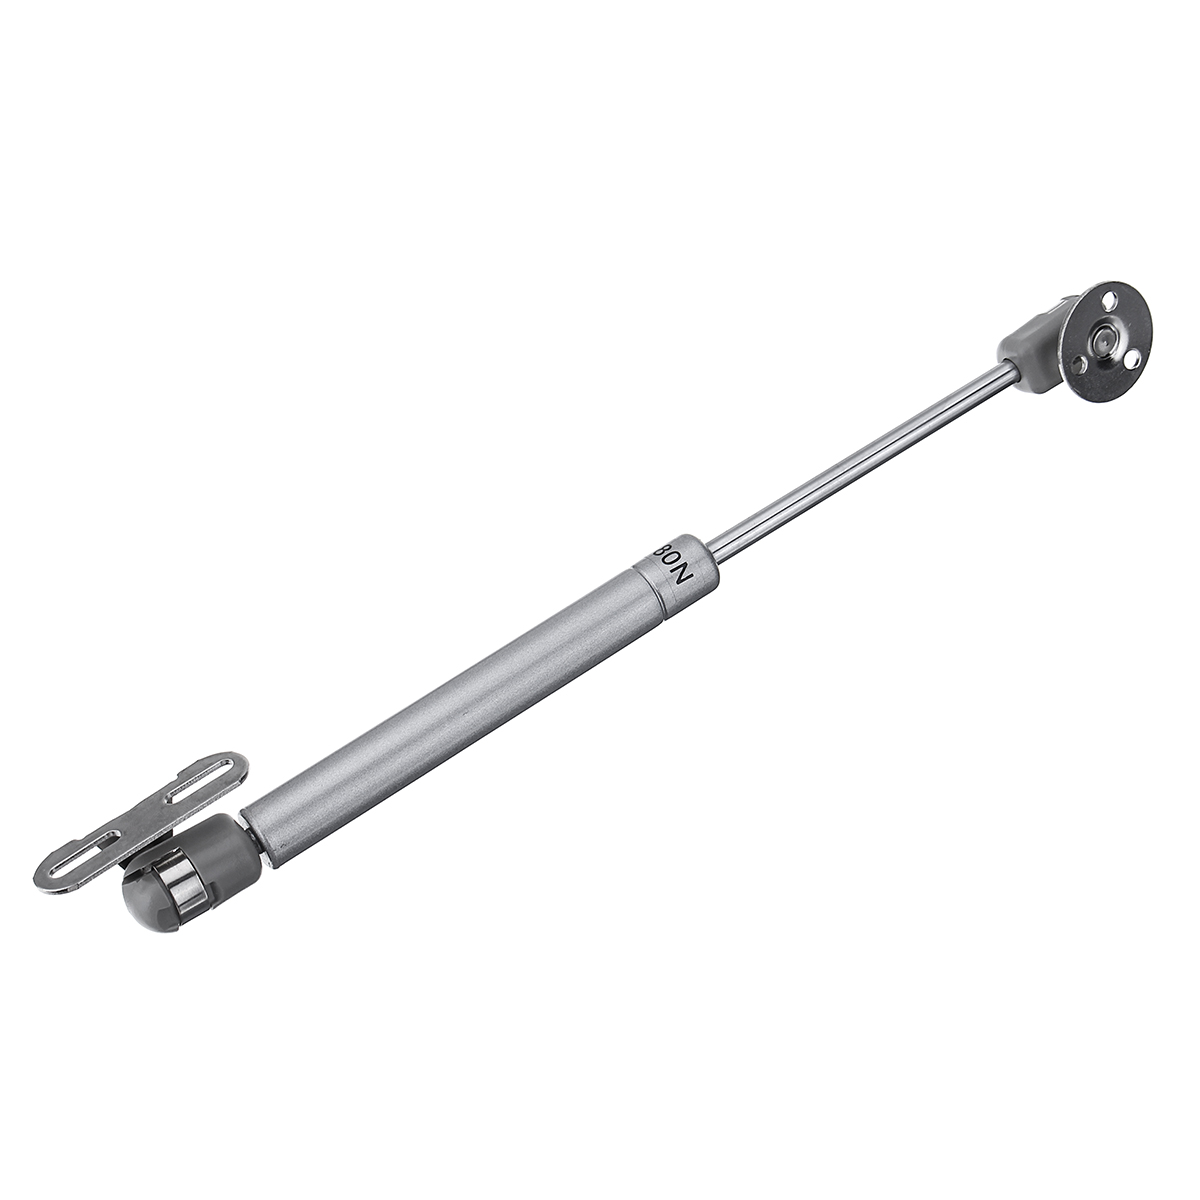 Hydraulic-Support-Rod-Gas-Strut-Lift-Door-Hinges-Levers-Kitchen-Shelf-Furniture-Support-1543869-3